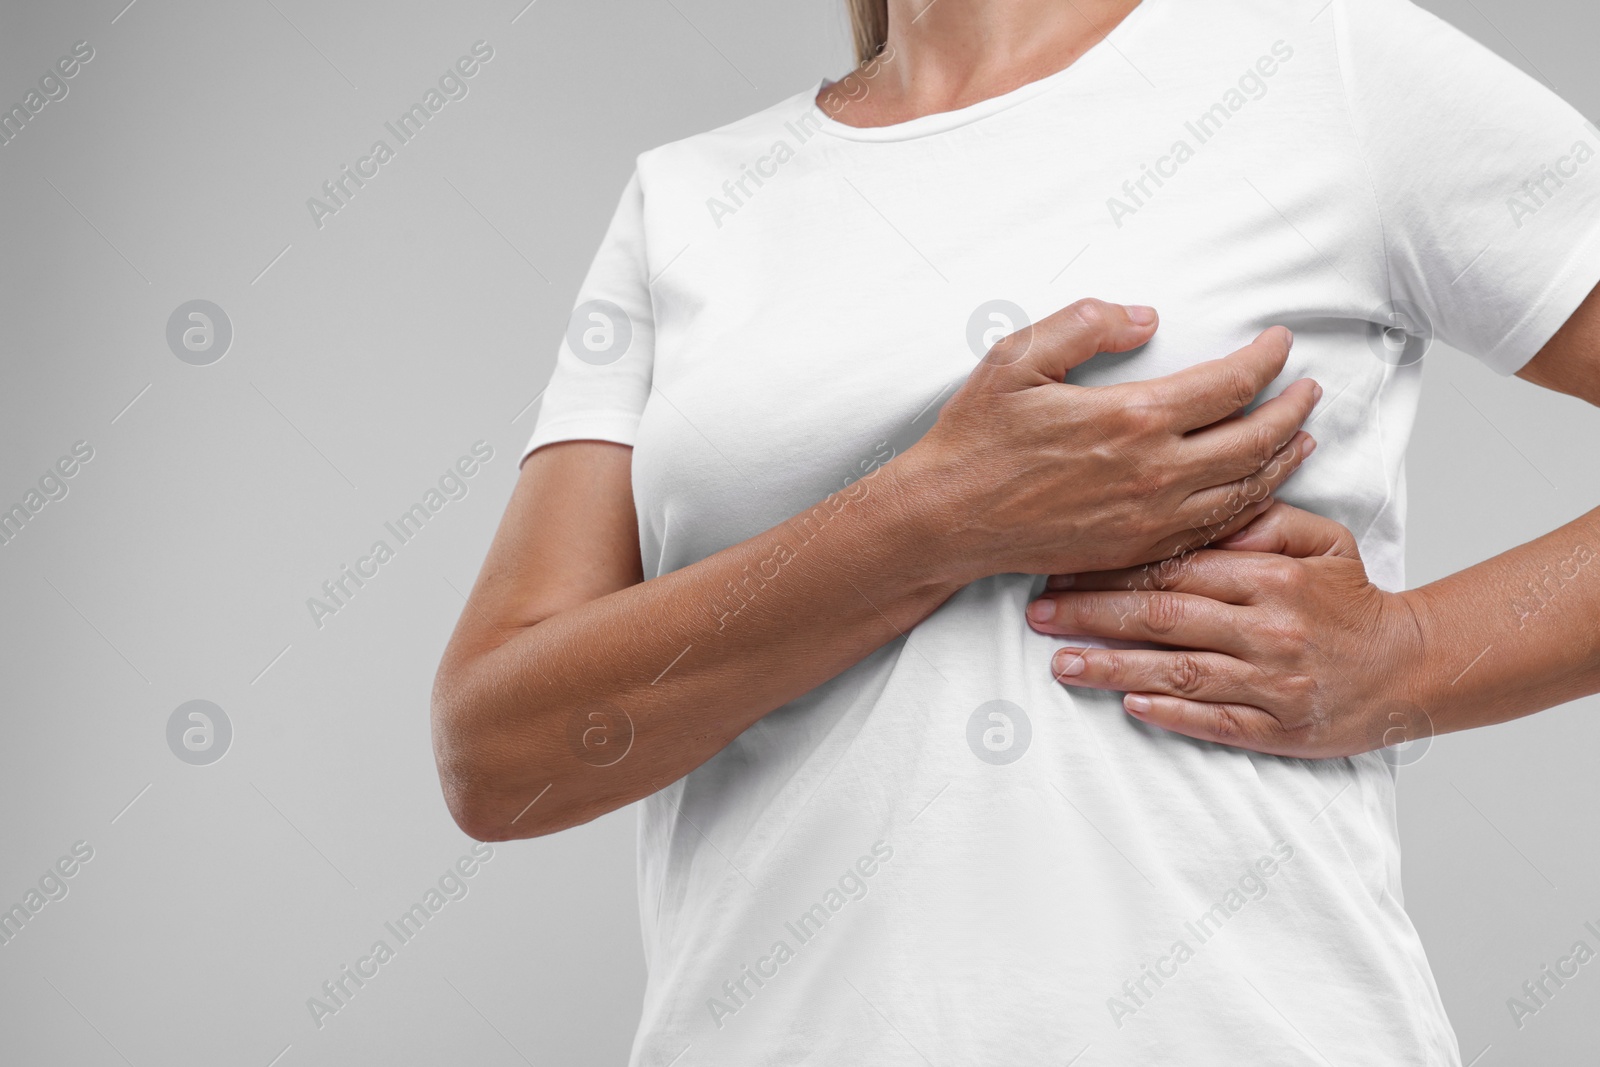 Photo of Woman doing breast self-examination on light grey background, closeup. Space for text